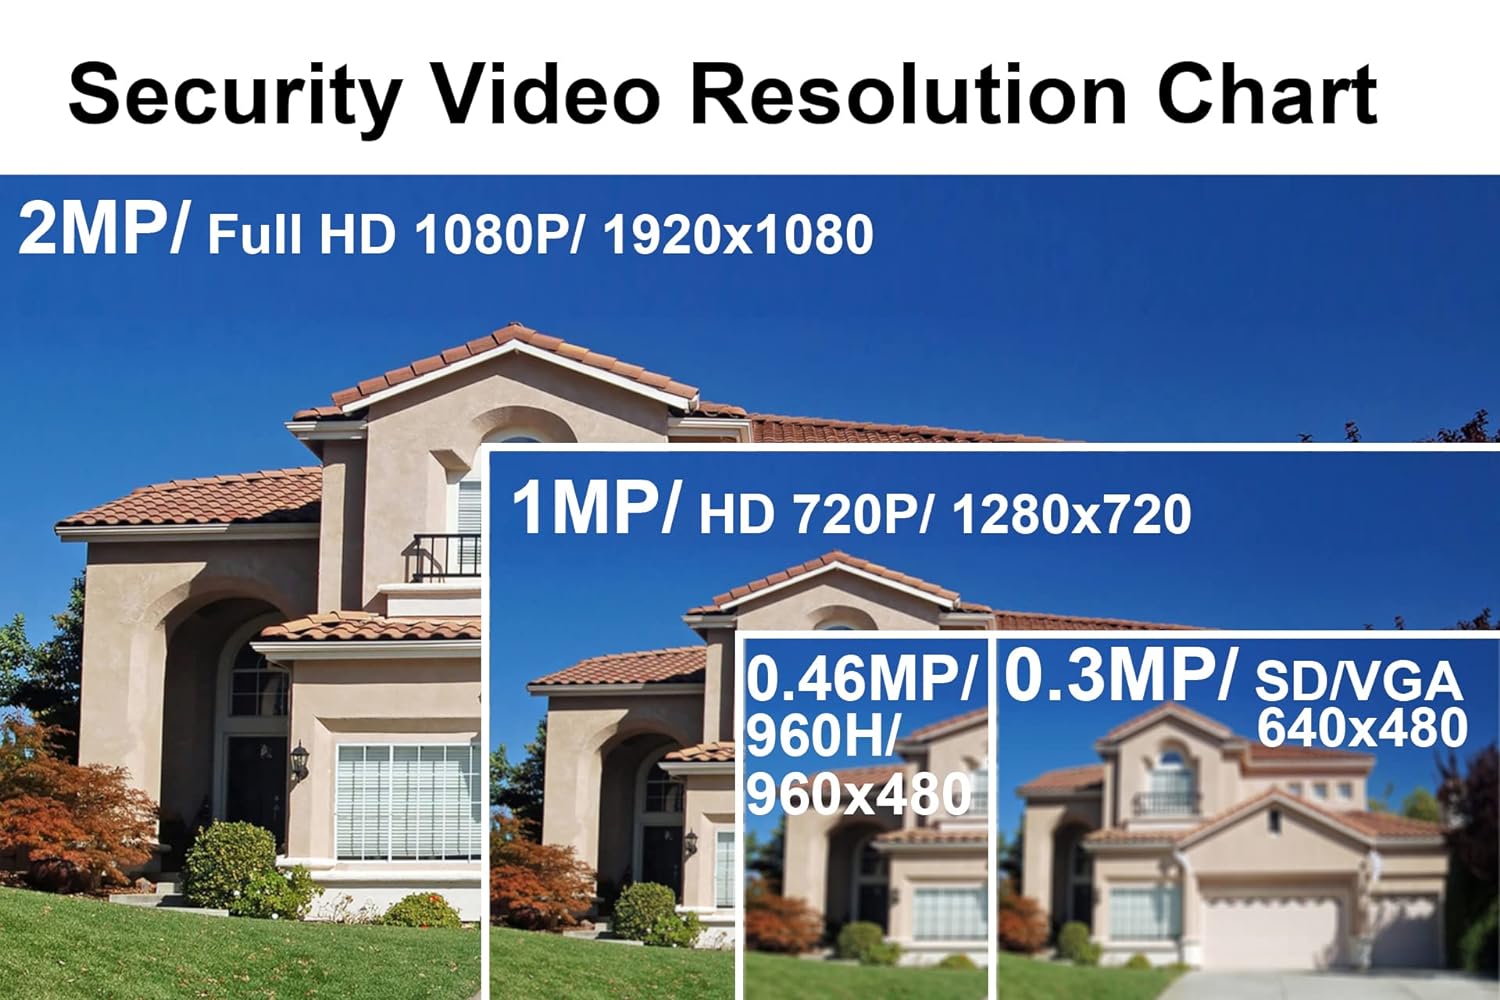 101AV 1080P Dual Power DC12V AC24V 4in1 (TVI, AHD, CVI, SD Analog) 2.8-12mm Lens Wide Angle IR Dome Security Camera in/Outdoor Smart IR Range 100ft Office Home